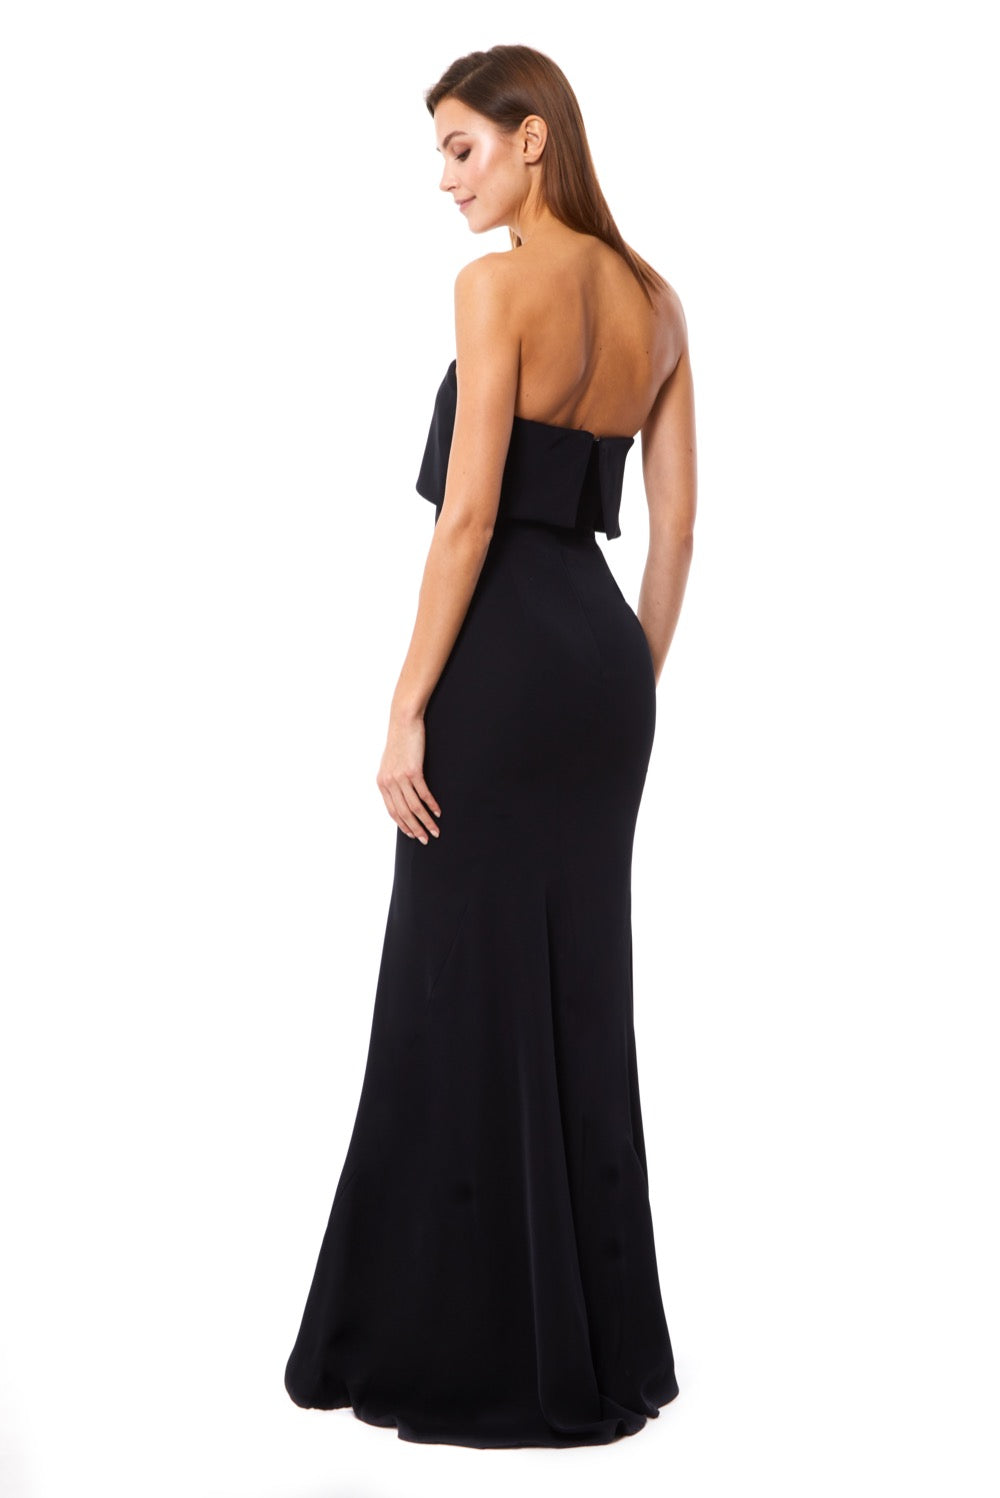 Jarlo black strapless maxi dress with bust overlay